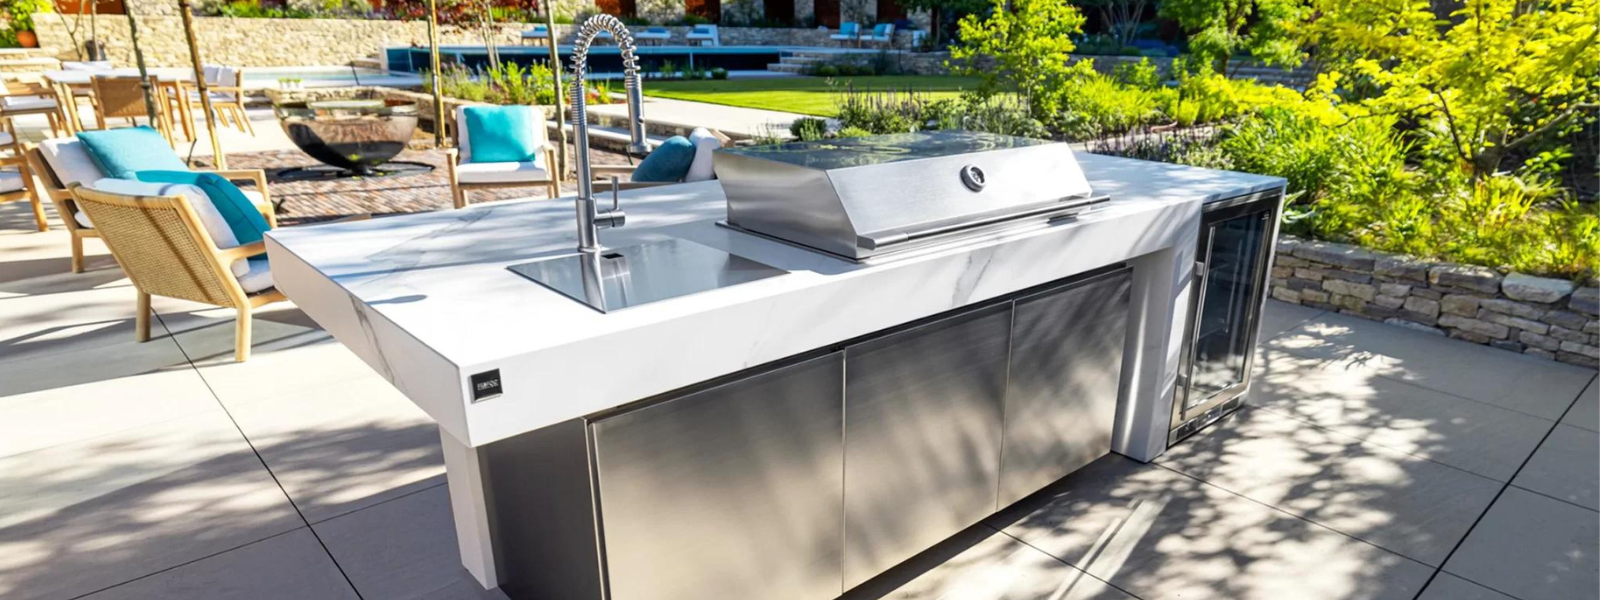 Beautiful Fesfoc Outdoor Kitchens. Available from Kitchen in the Garden, Surrey